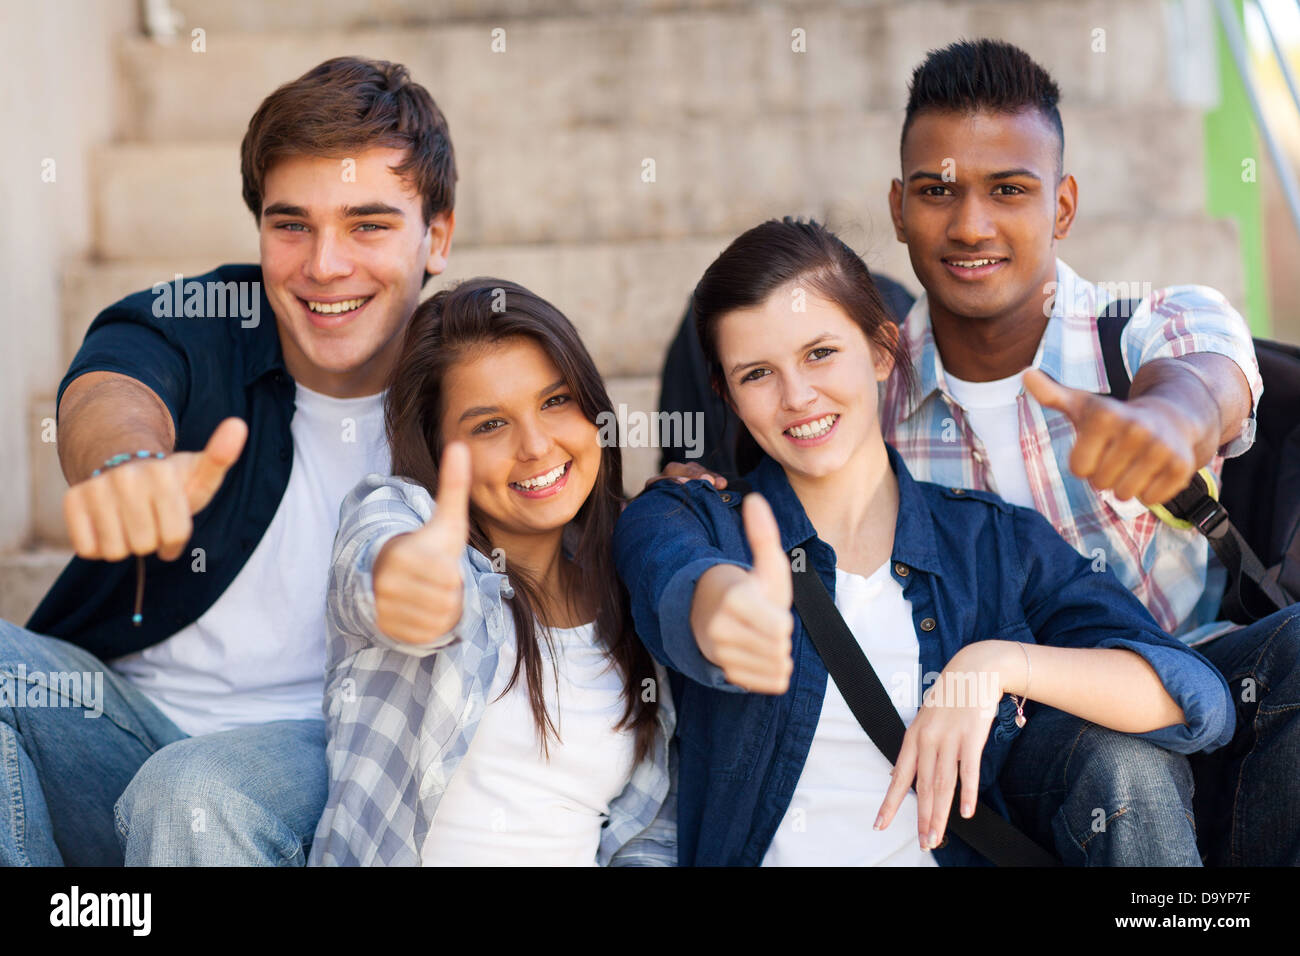 group smiling high school students giving thumbs up Stock Photo